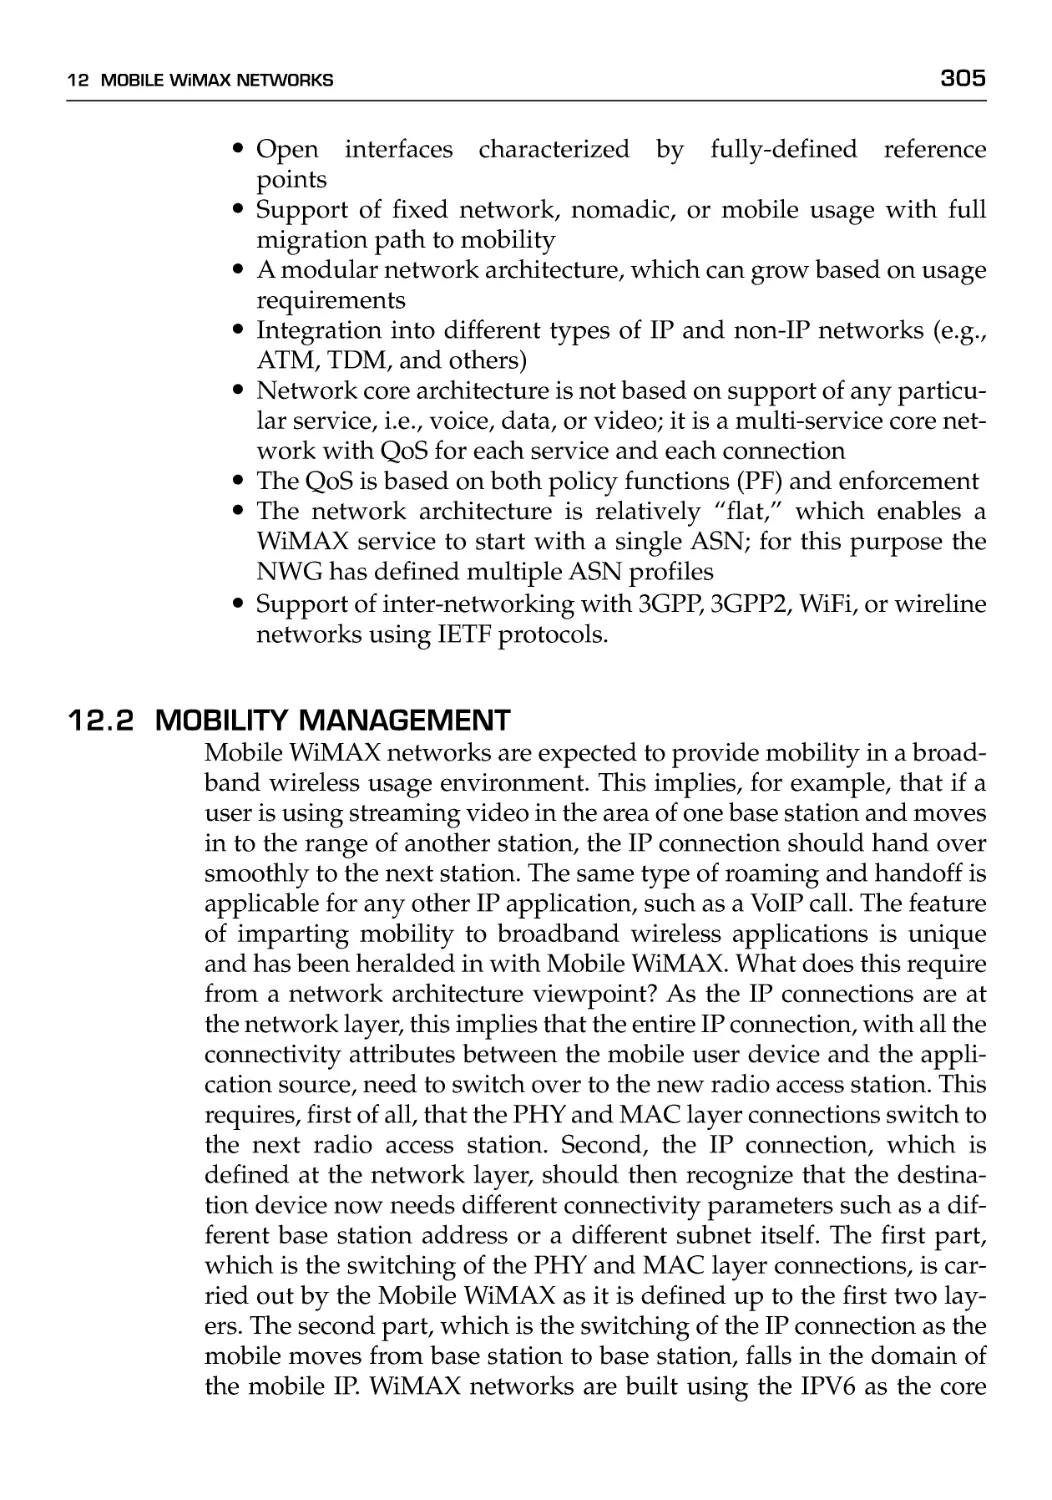 12.2 Mobility Management